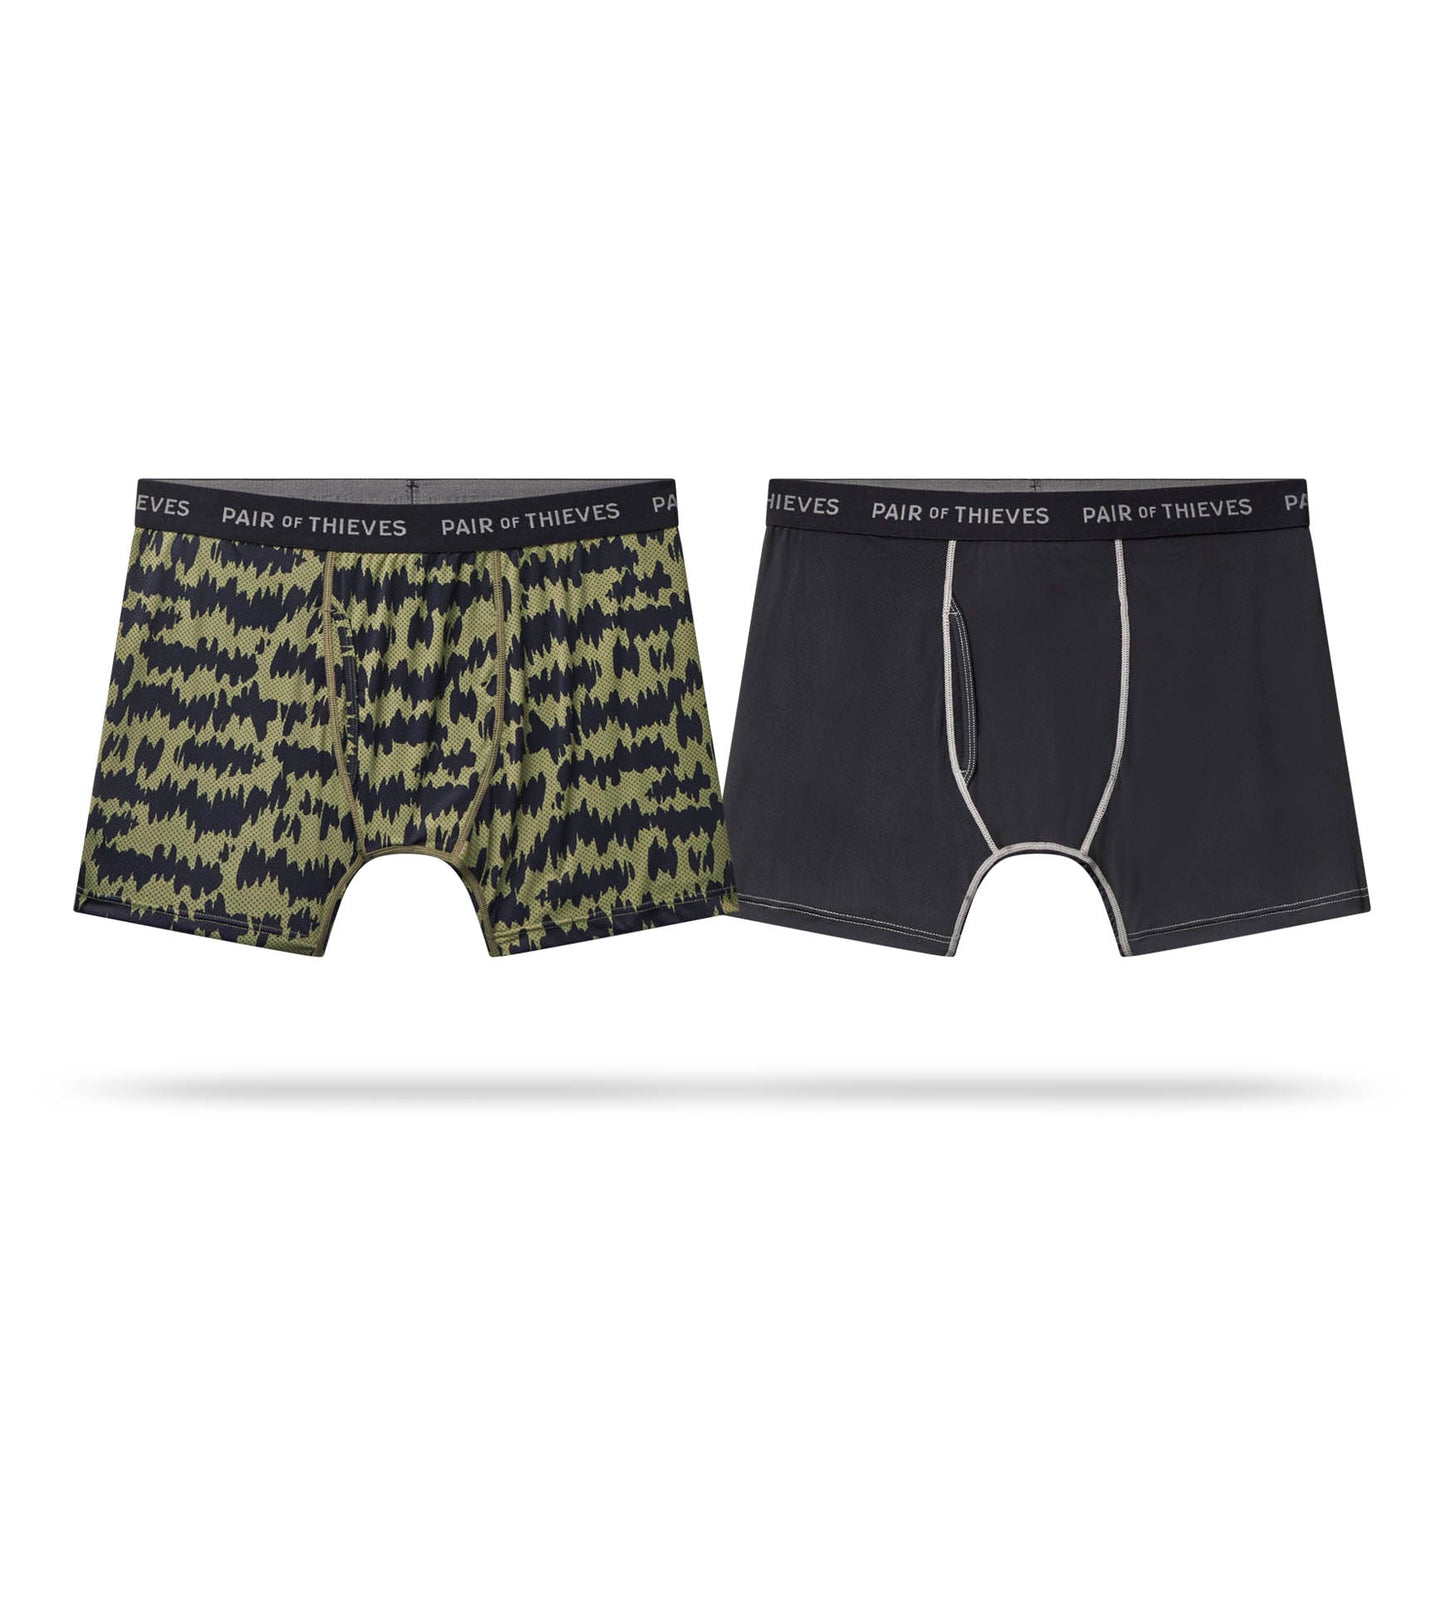  Pair Of Thieves Super Fit Underwear For Men Pack